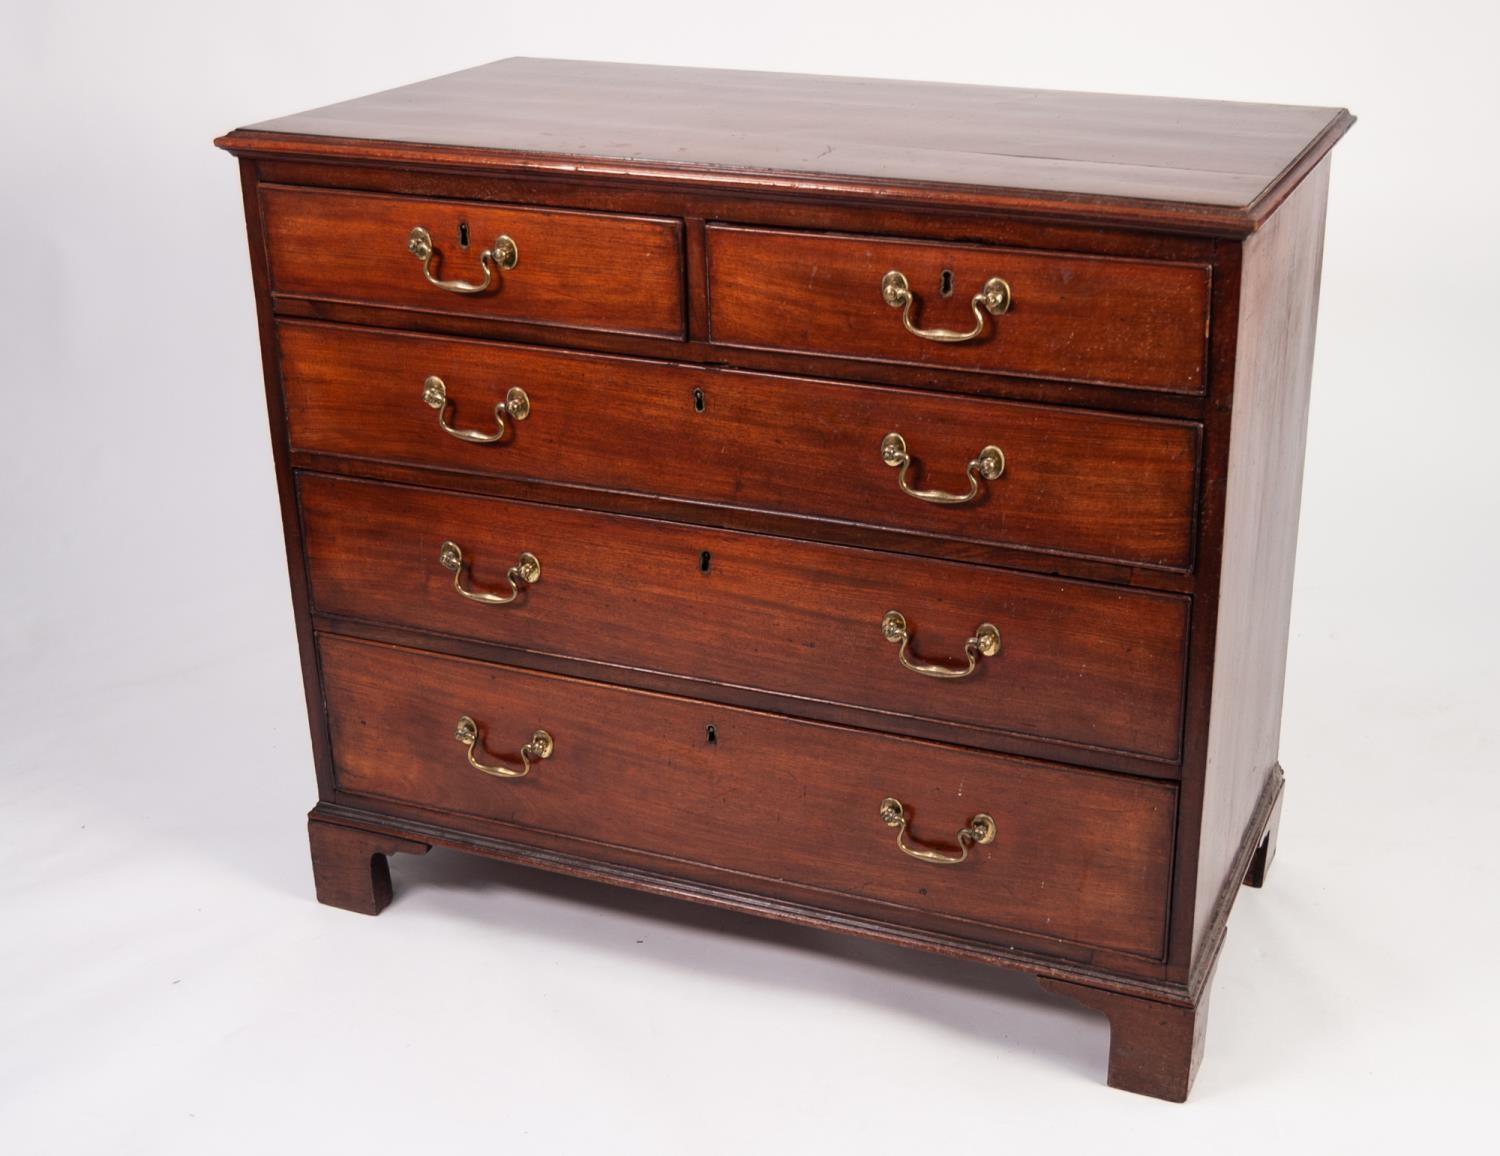 GEORGIAN MAHOGANY SMALL CHEST OF DRAWERS, the crossbanded and moulded oblong top outlined in boxwood